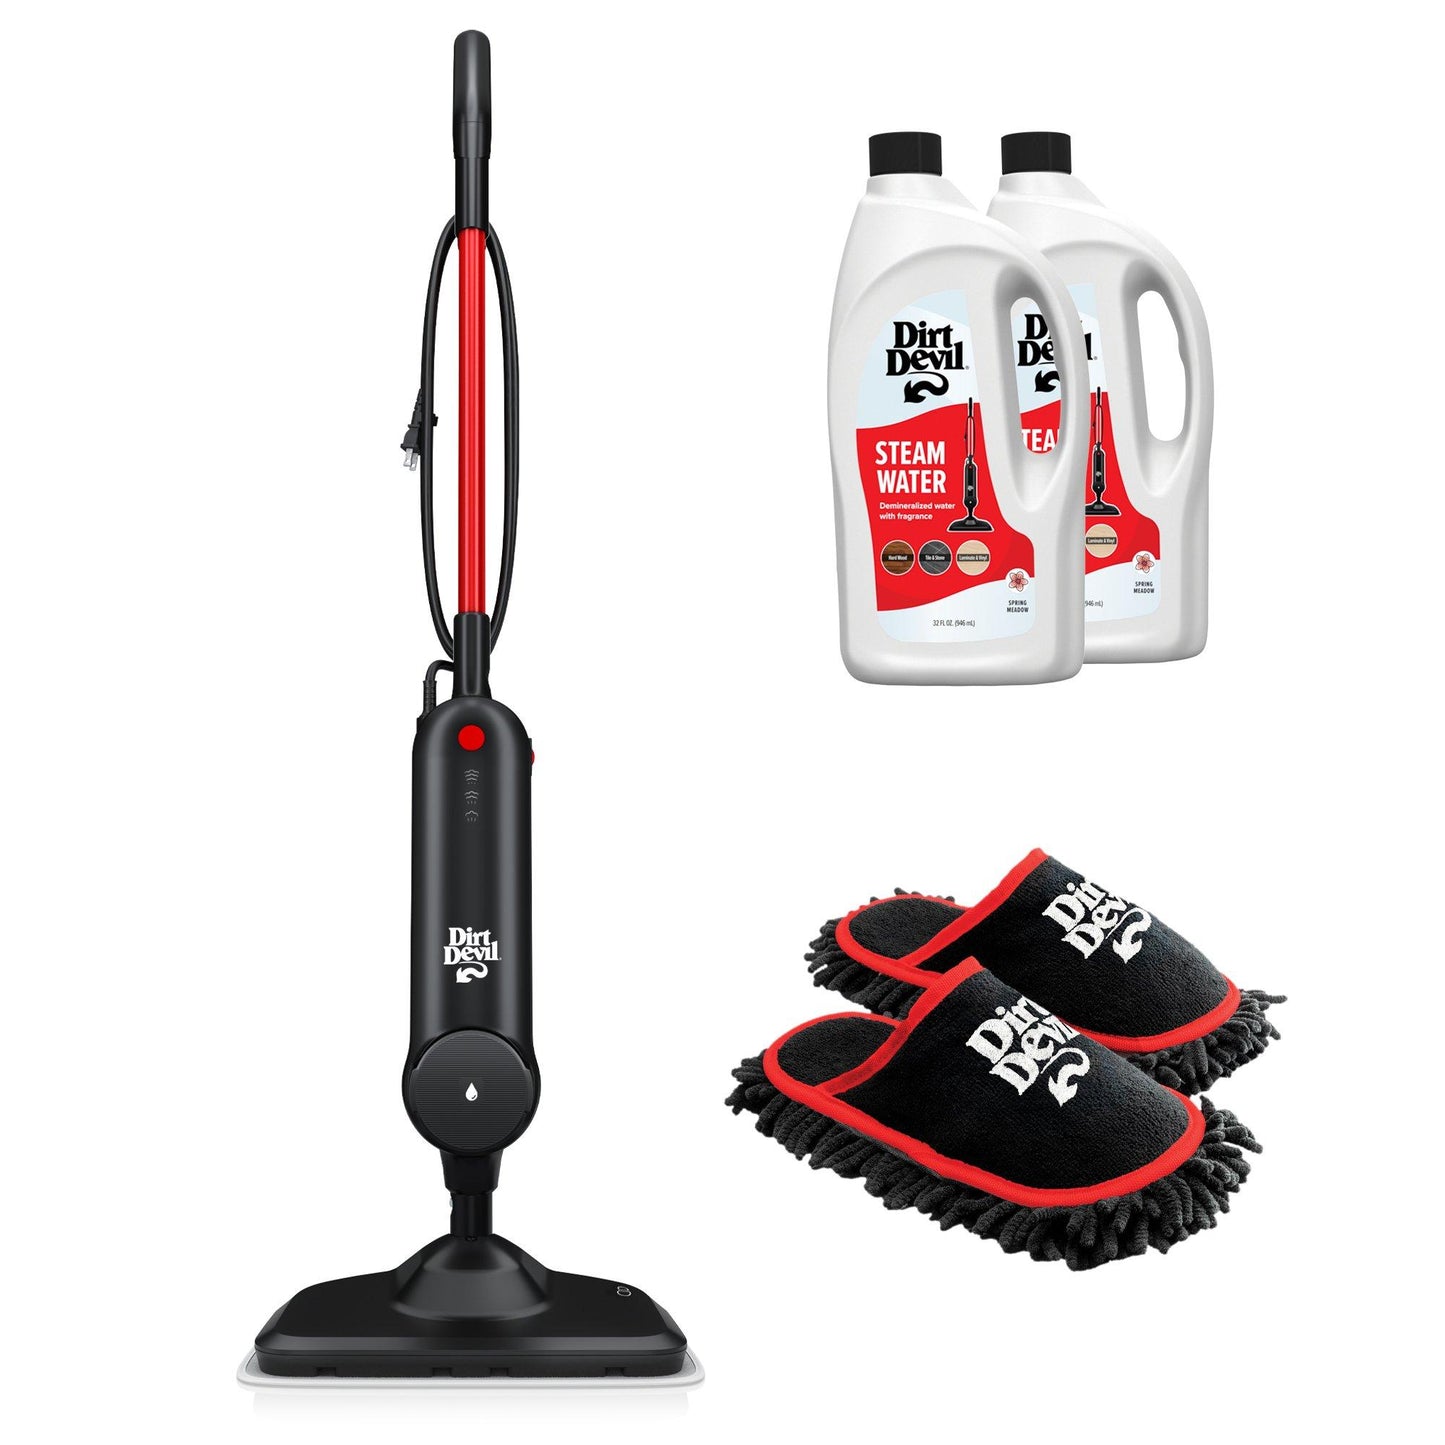 Steam Mop + Cleaning Slippers + 2PK Steam Water Bundle